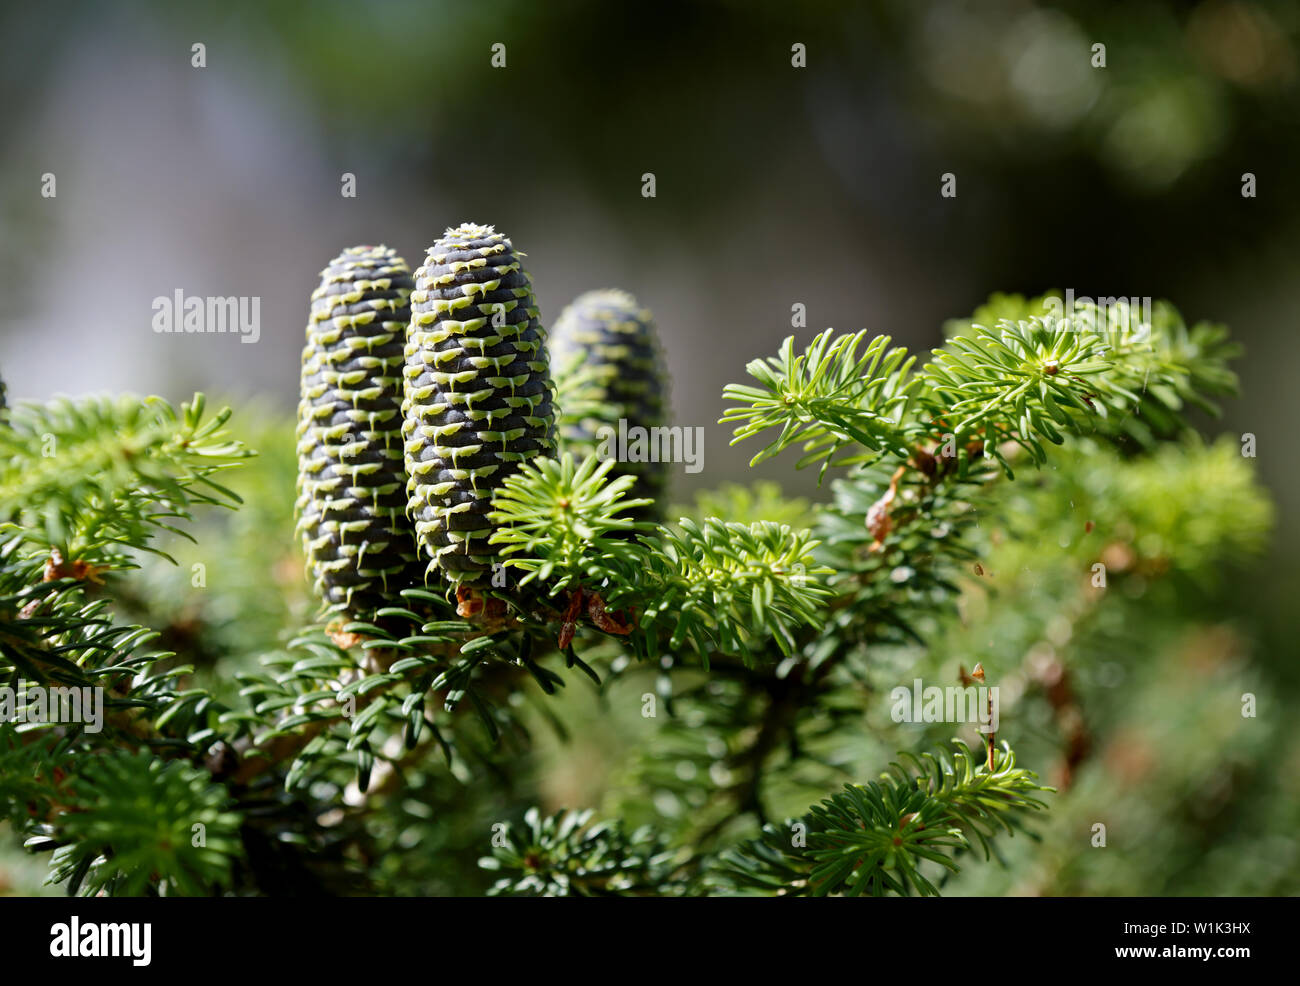 Beautiful close-up of young blue cones on the branch of fir Abies koreana with green spruce needles Stock Photo